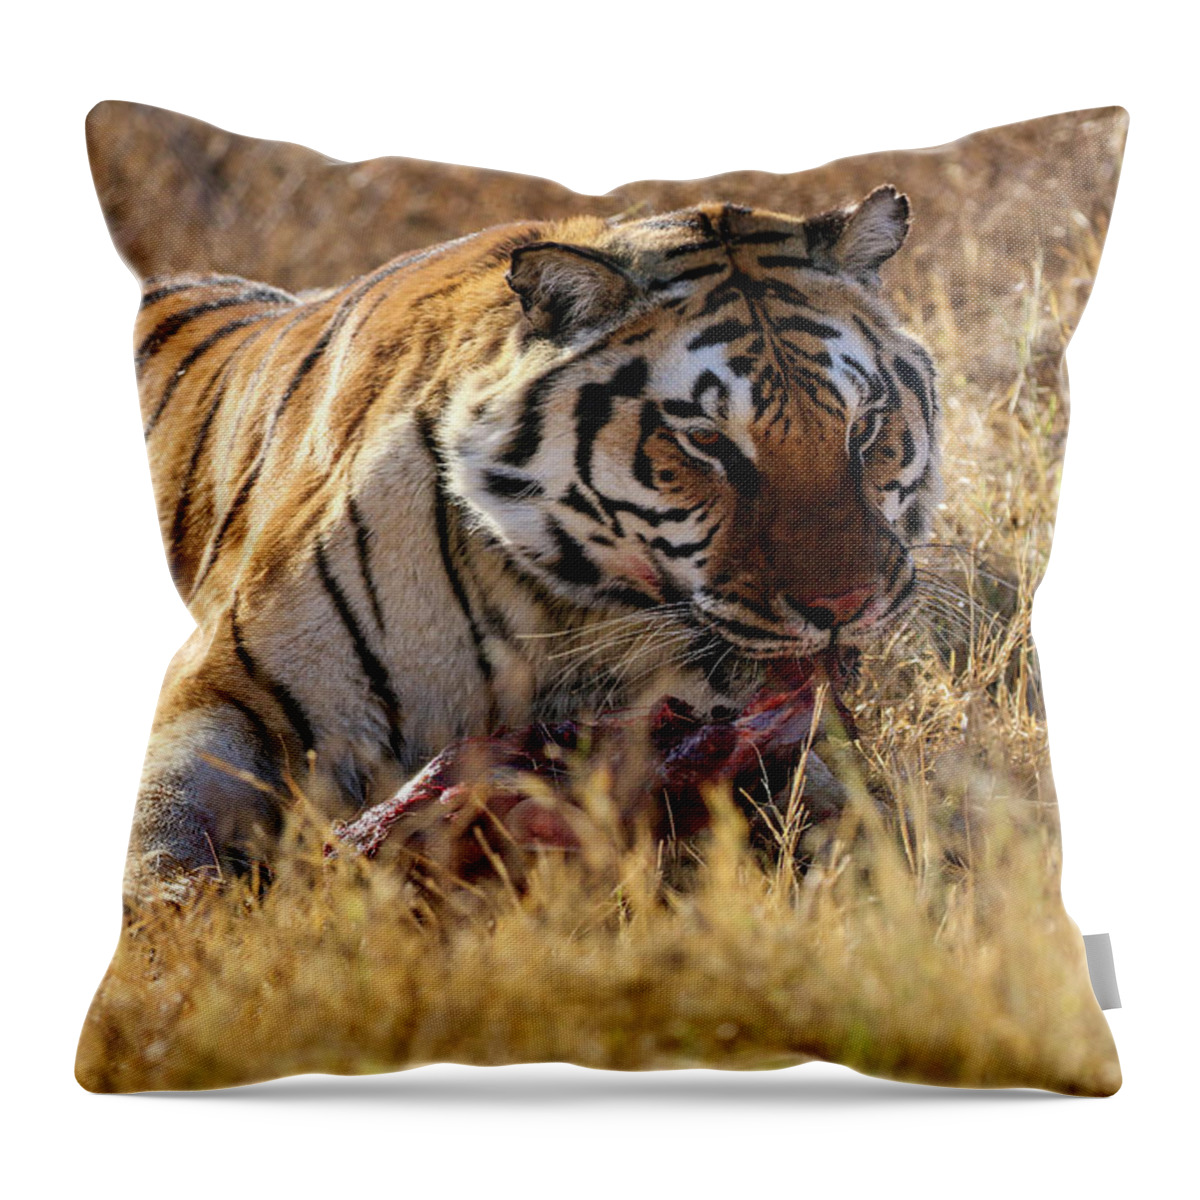 Arizona Throw Pillow featuring the photograph Siberian Tiger Eating by Dawn Richards